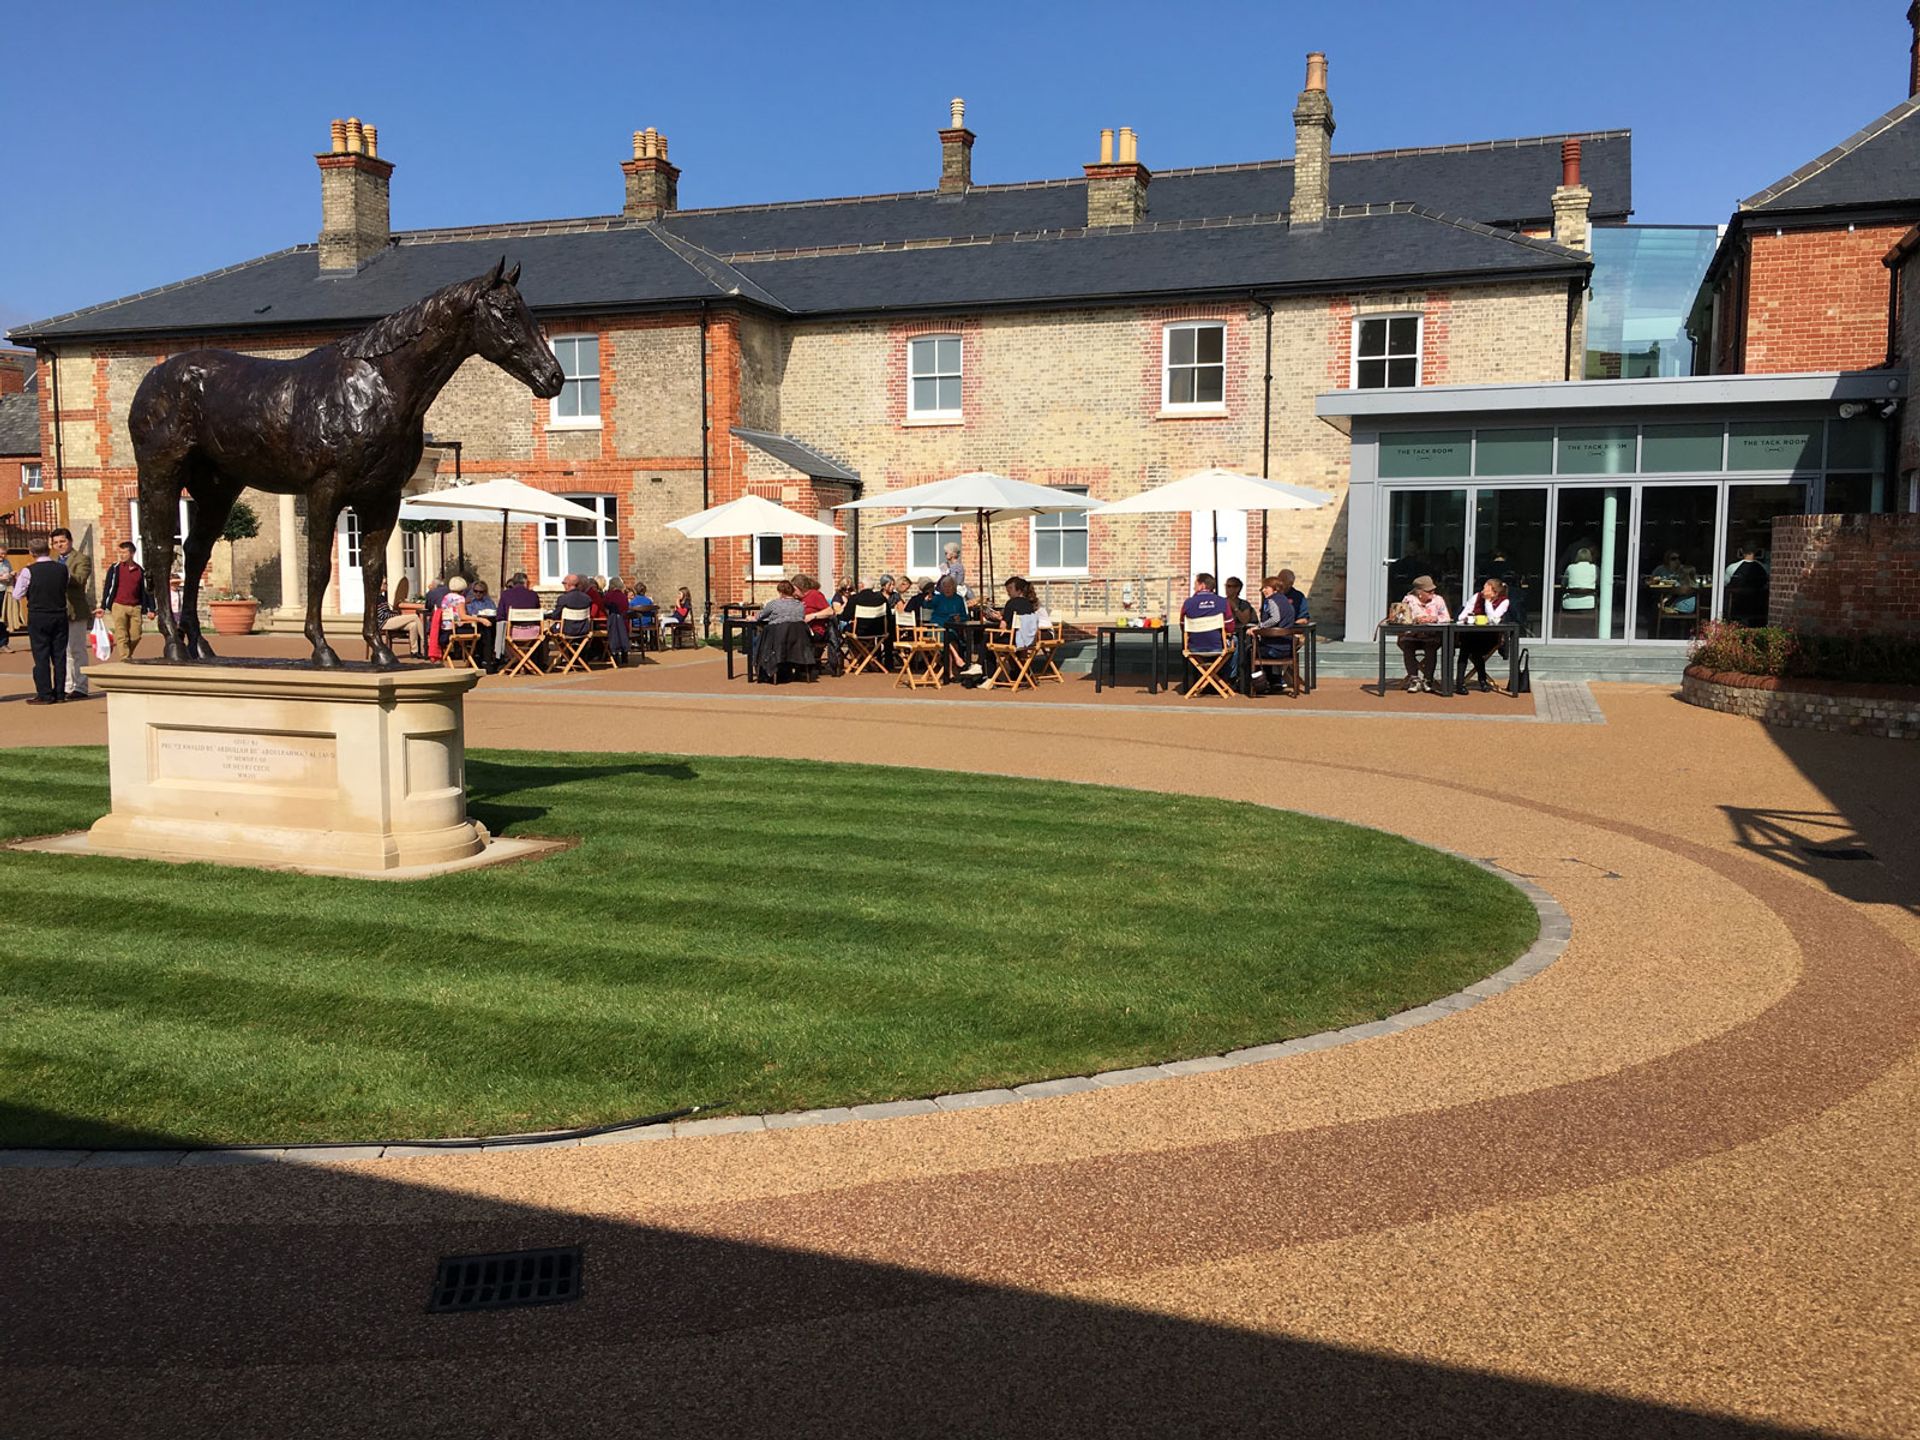 The courtyard at the the National Heritage Centre for Horseracing & Sporting Art in Newmarket © Courtesy of the National Heritage Centre for Horseracing & Sporting Art